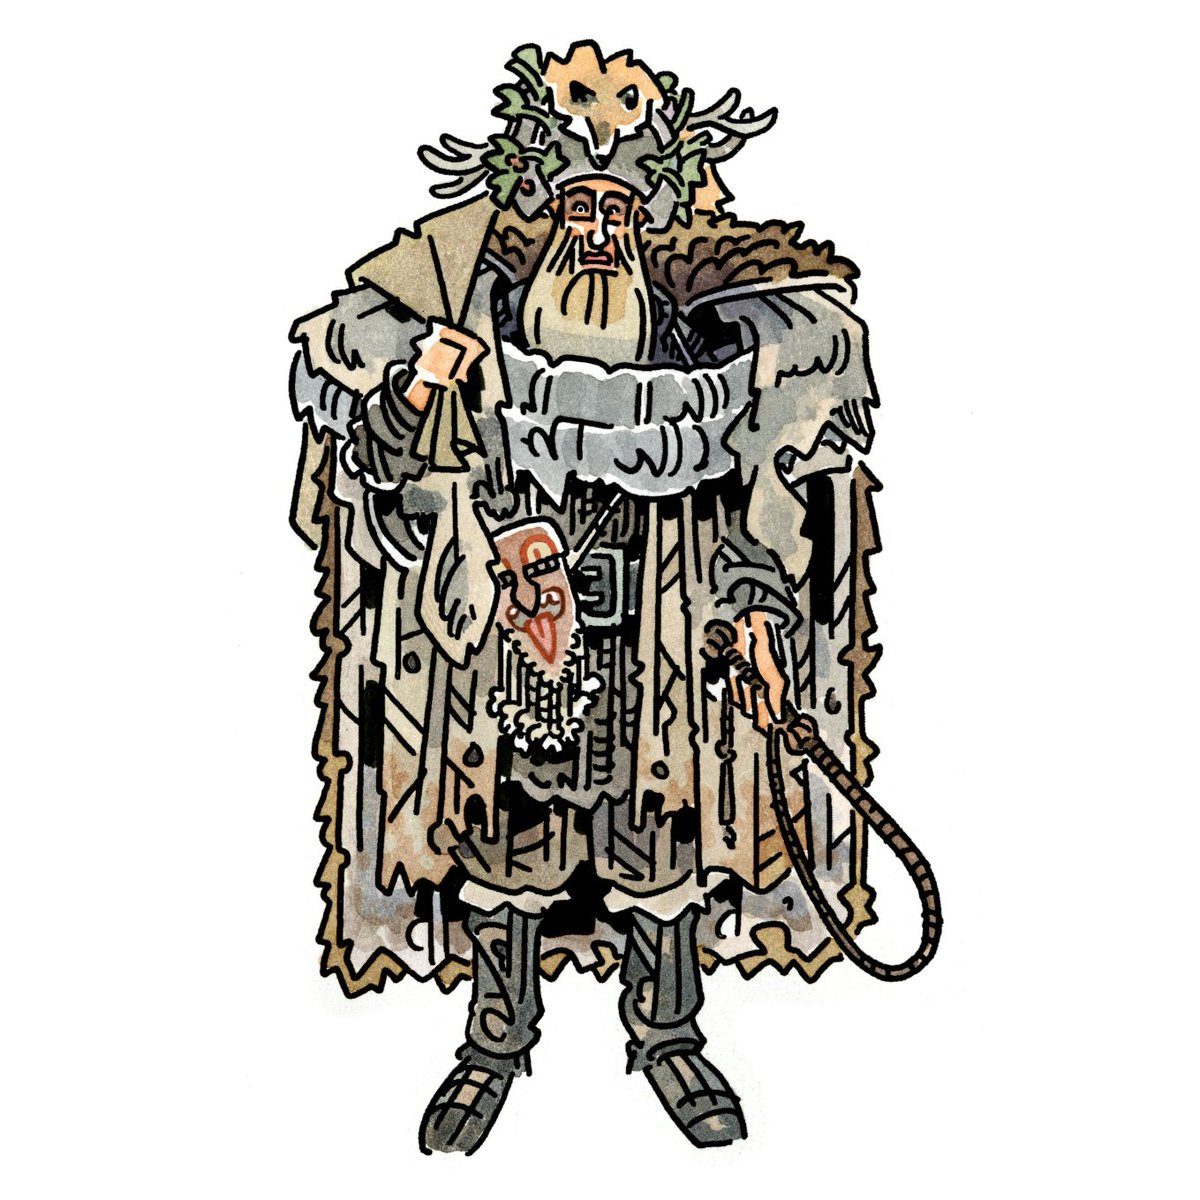 「#CompanionsOfChristmas 8: #Belsnickel!Be」|Chris Schweizerのイラスト